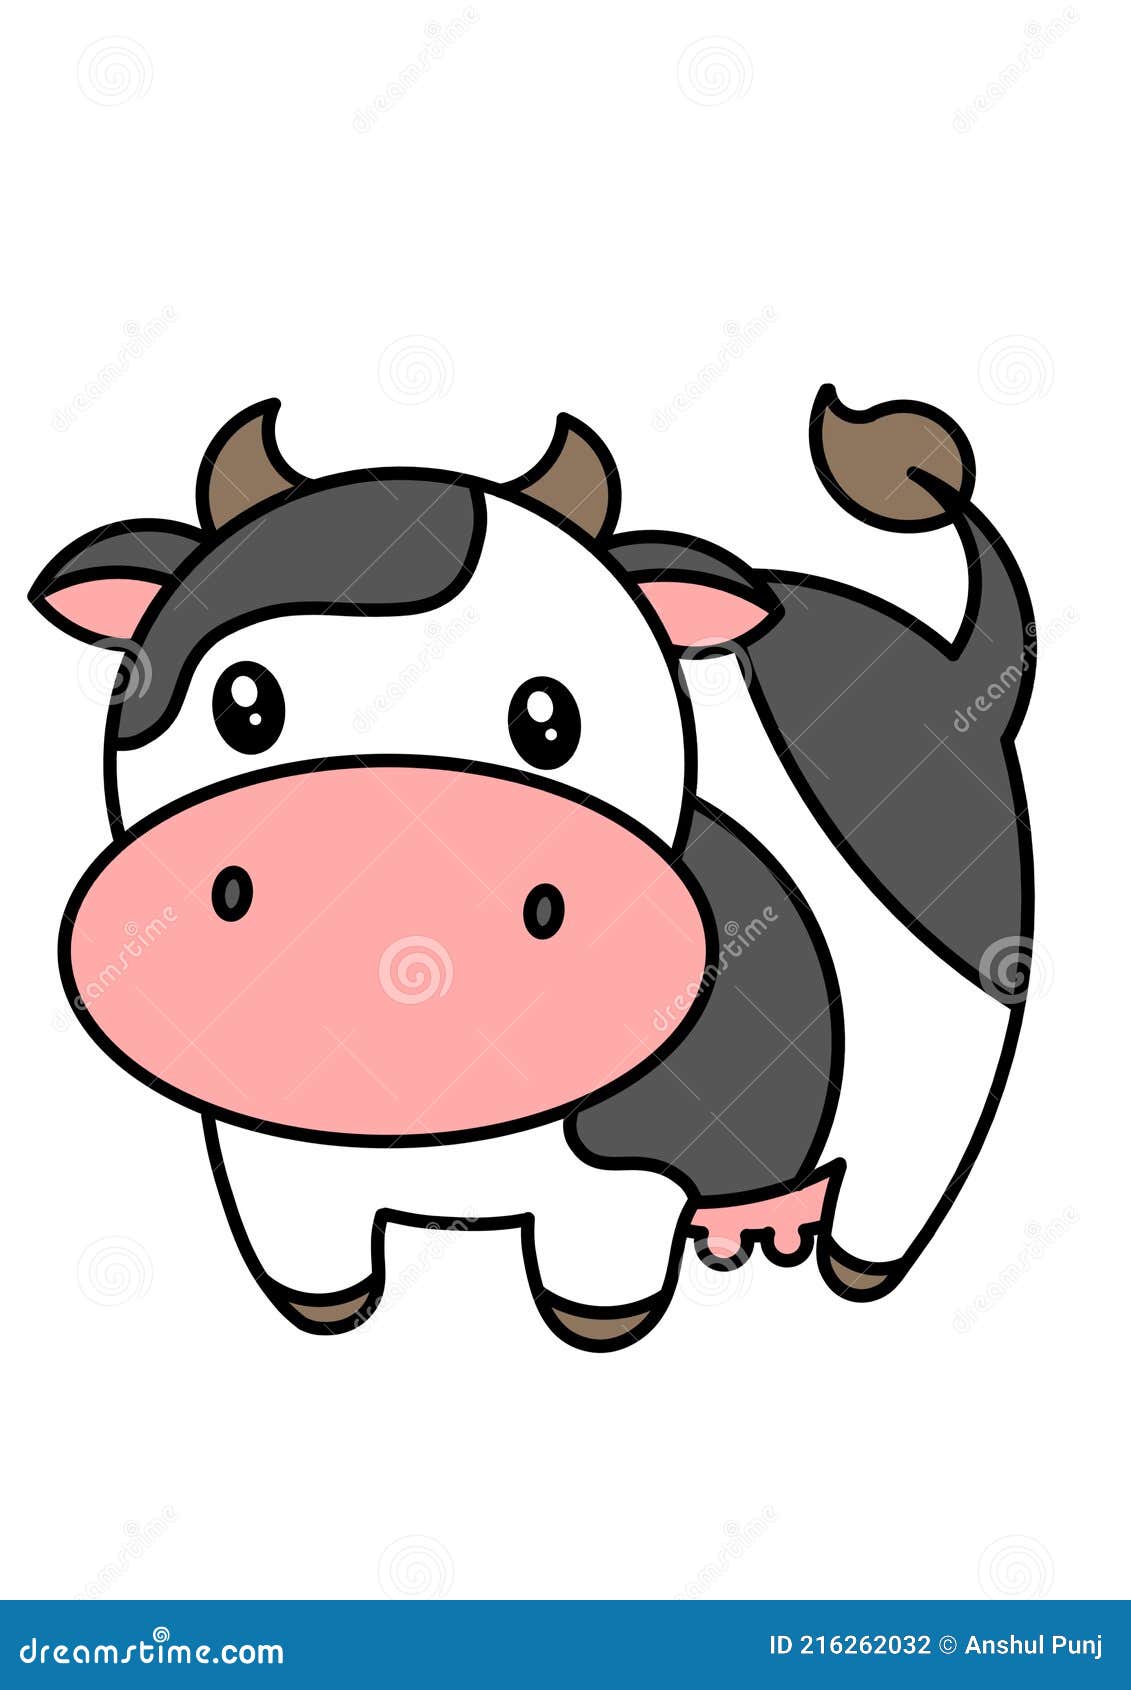 Cow coloring page | Free Printable Coloring Pages